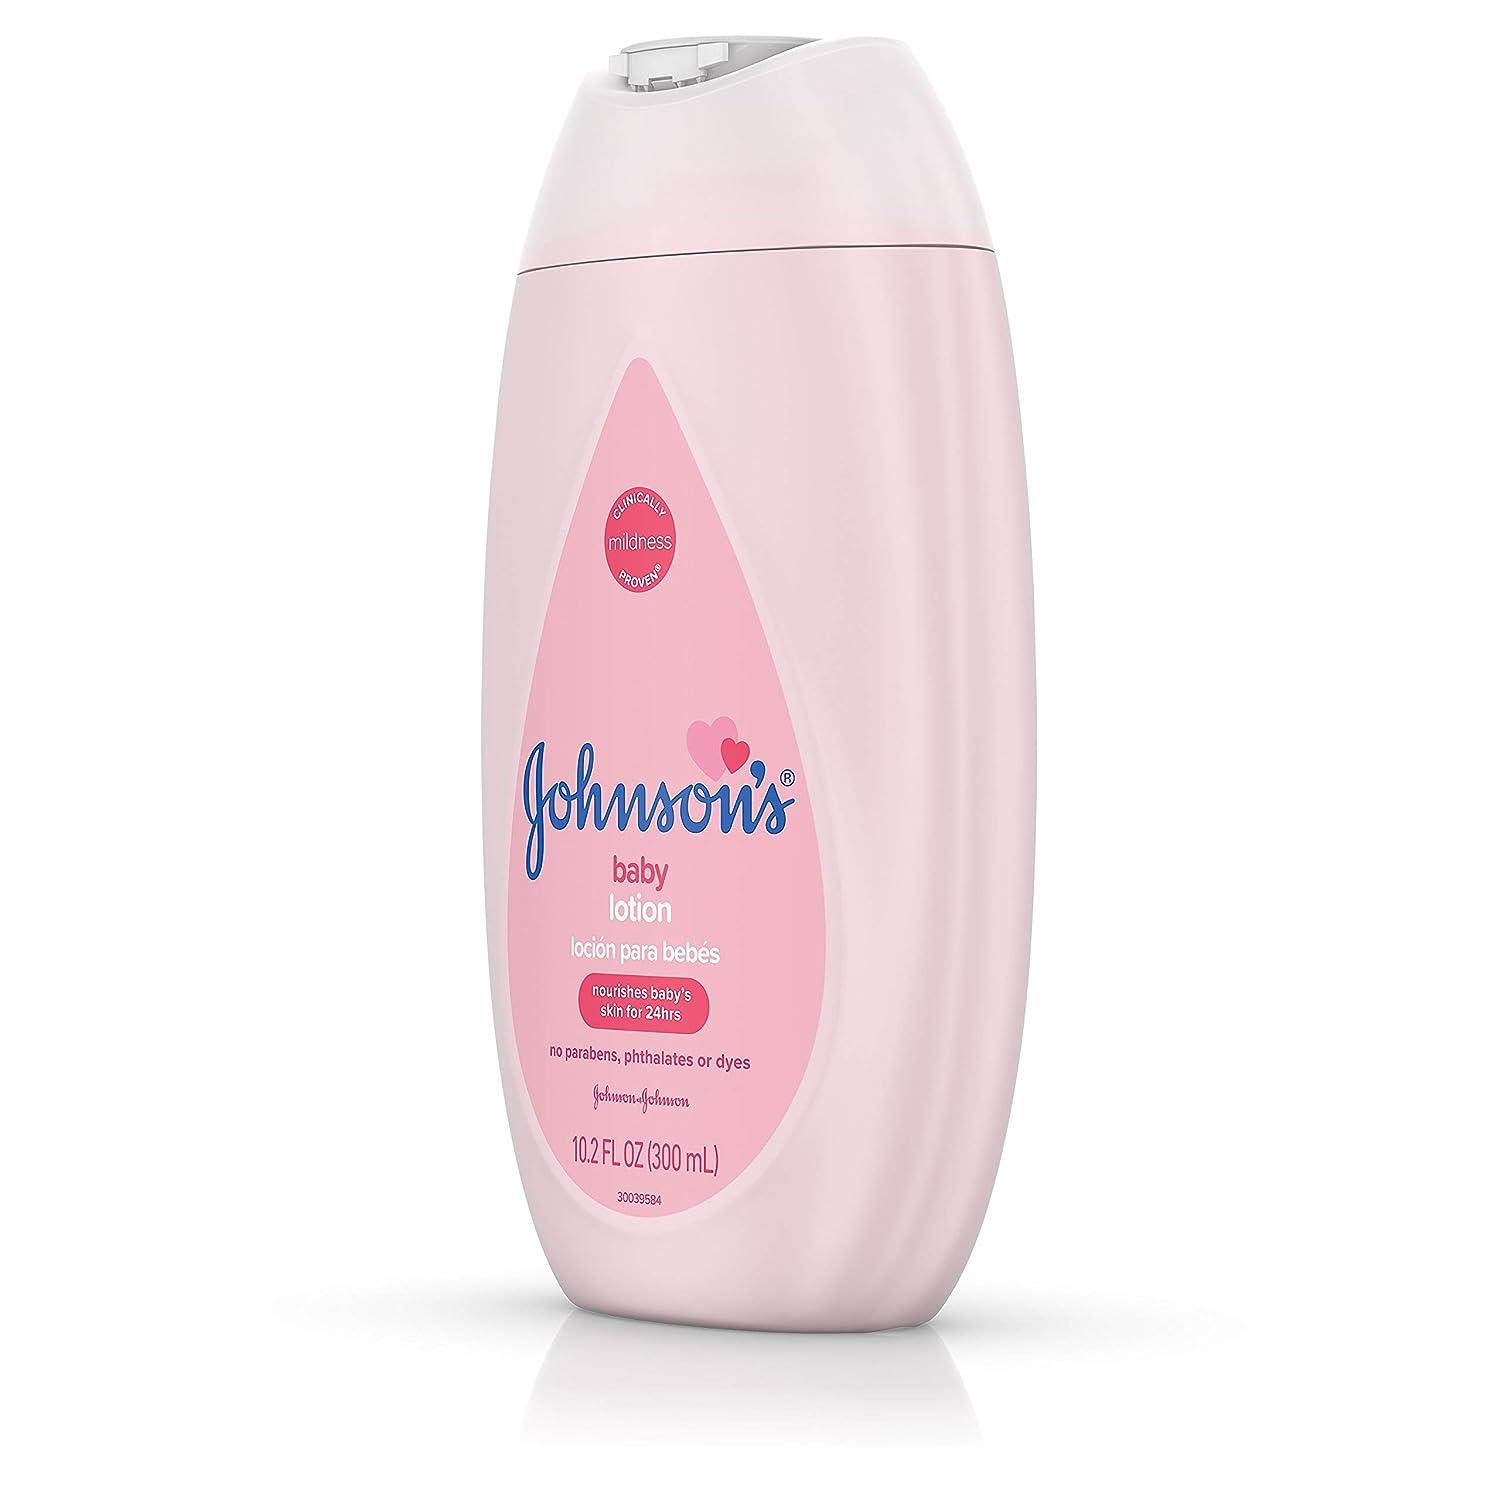 Johnson's Baby Moisturizing Pink Baby Lotion With Coconut Oil